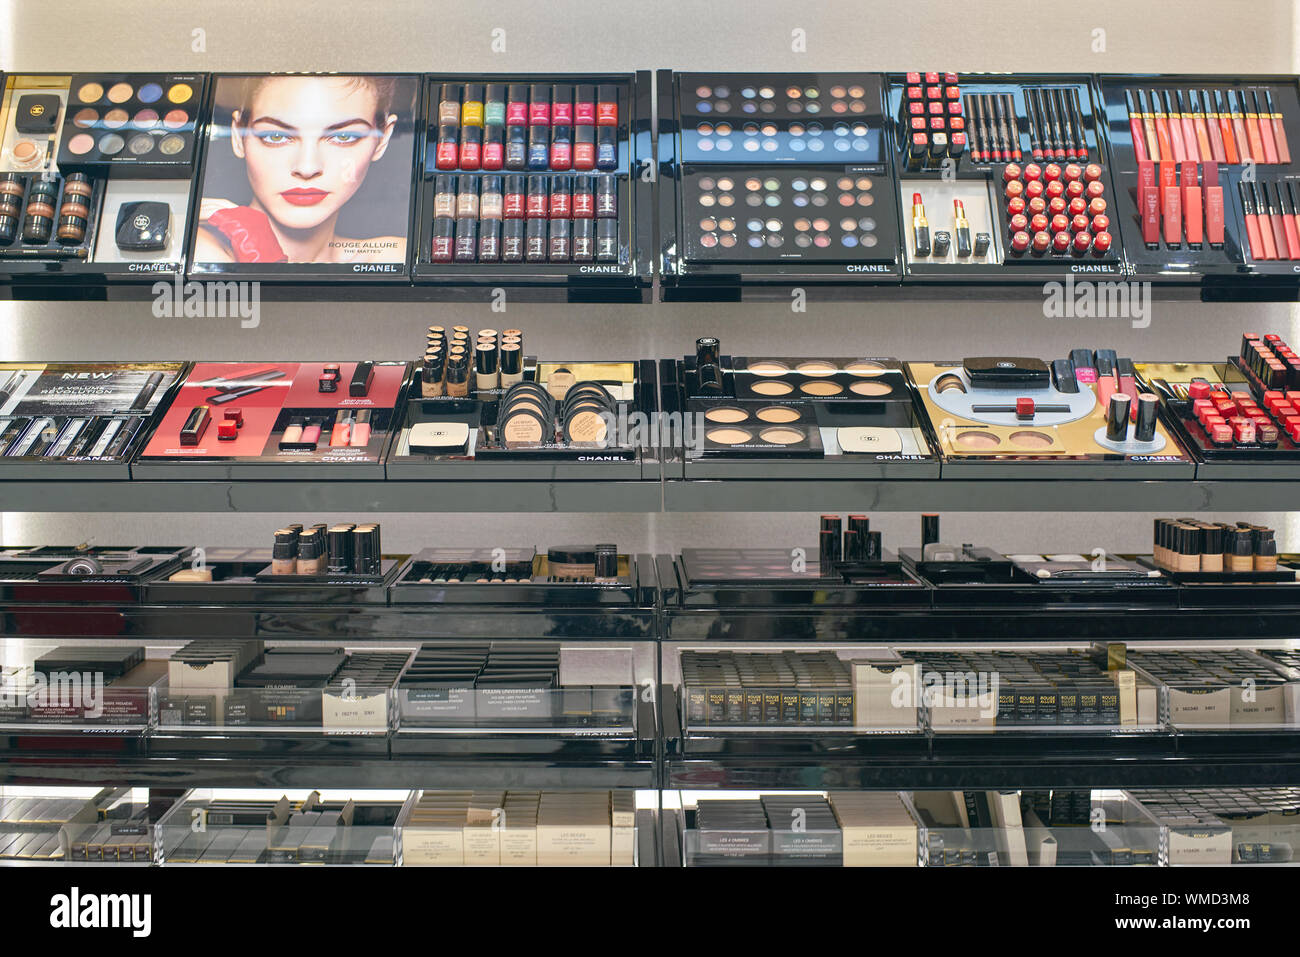 Chanel Just Launched a First-of-its-kind Beauty Atelier in NYC